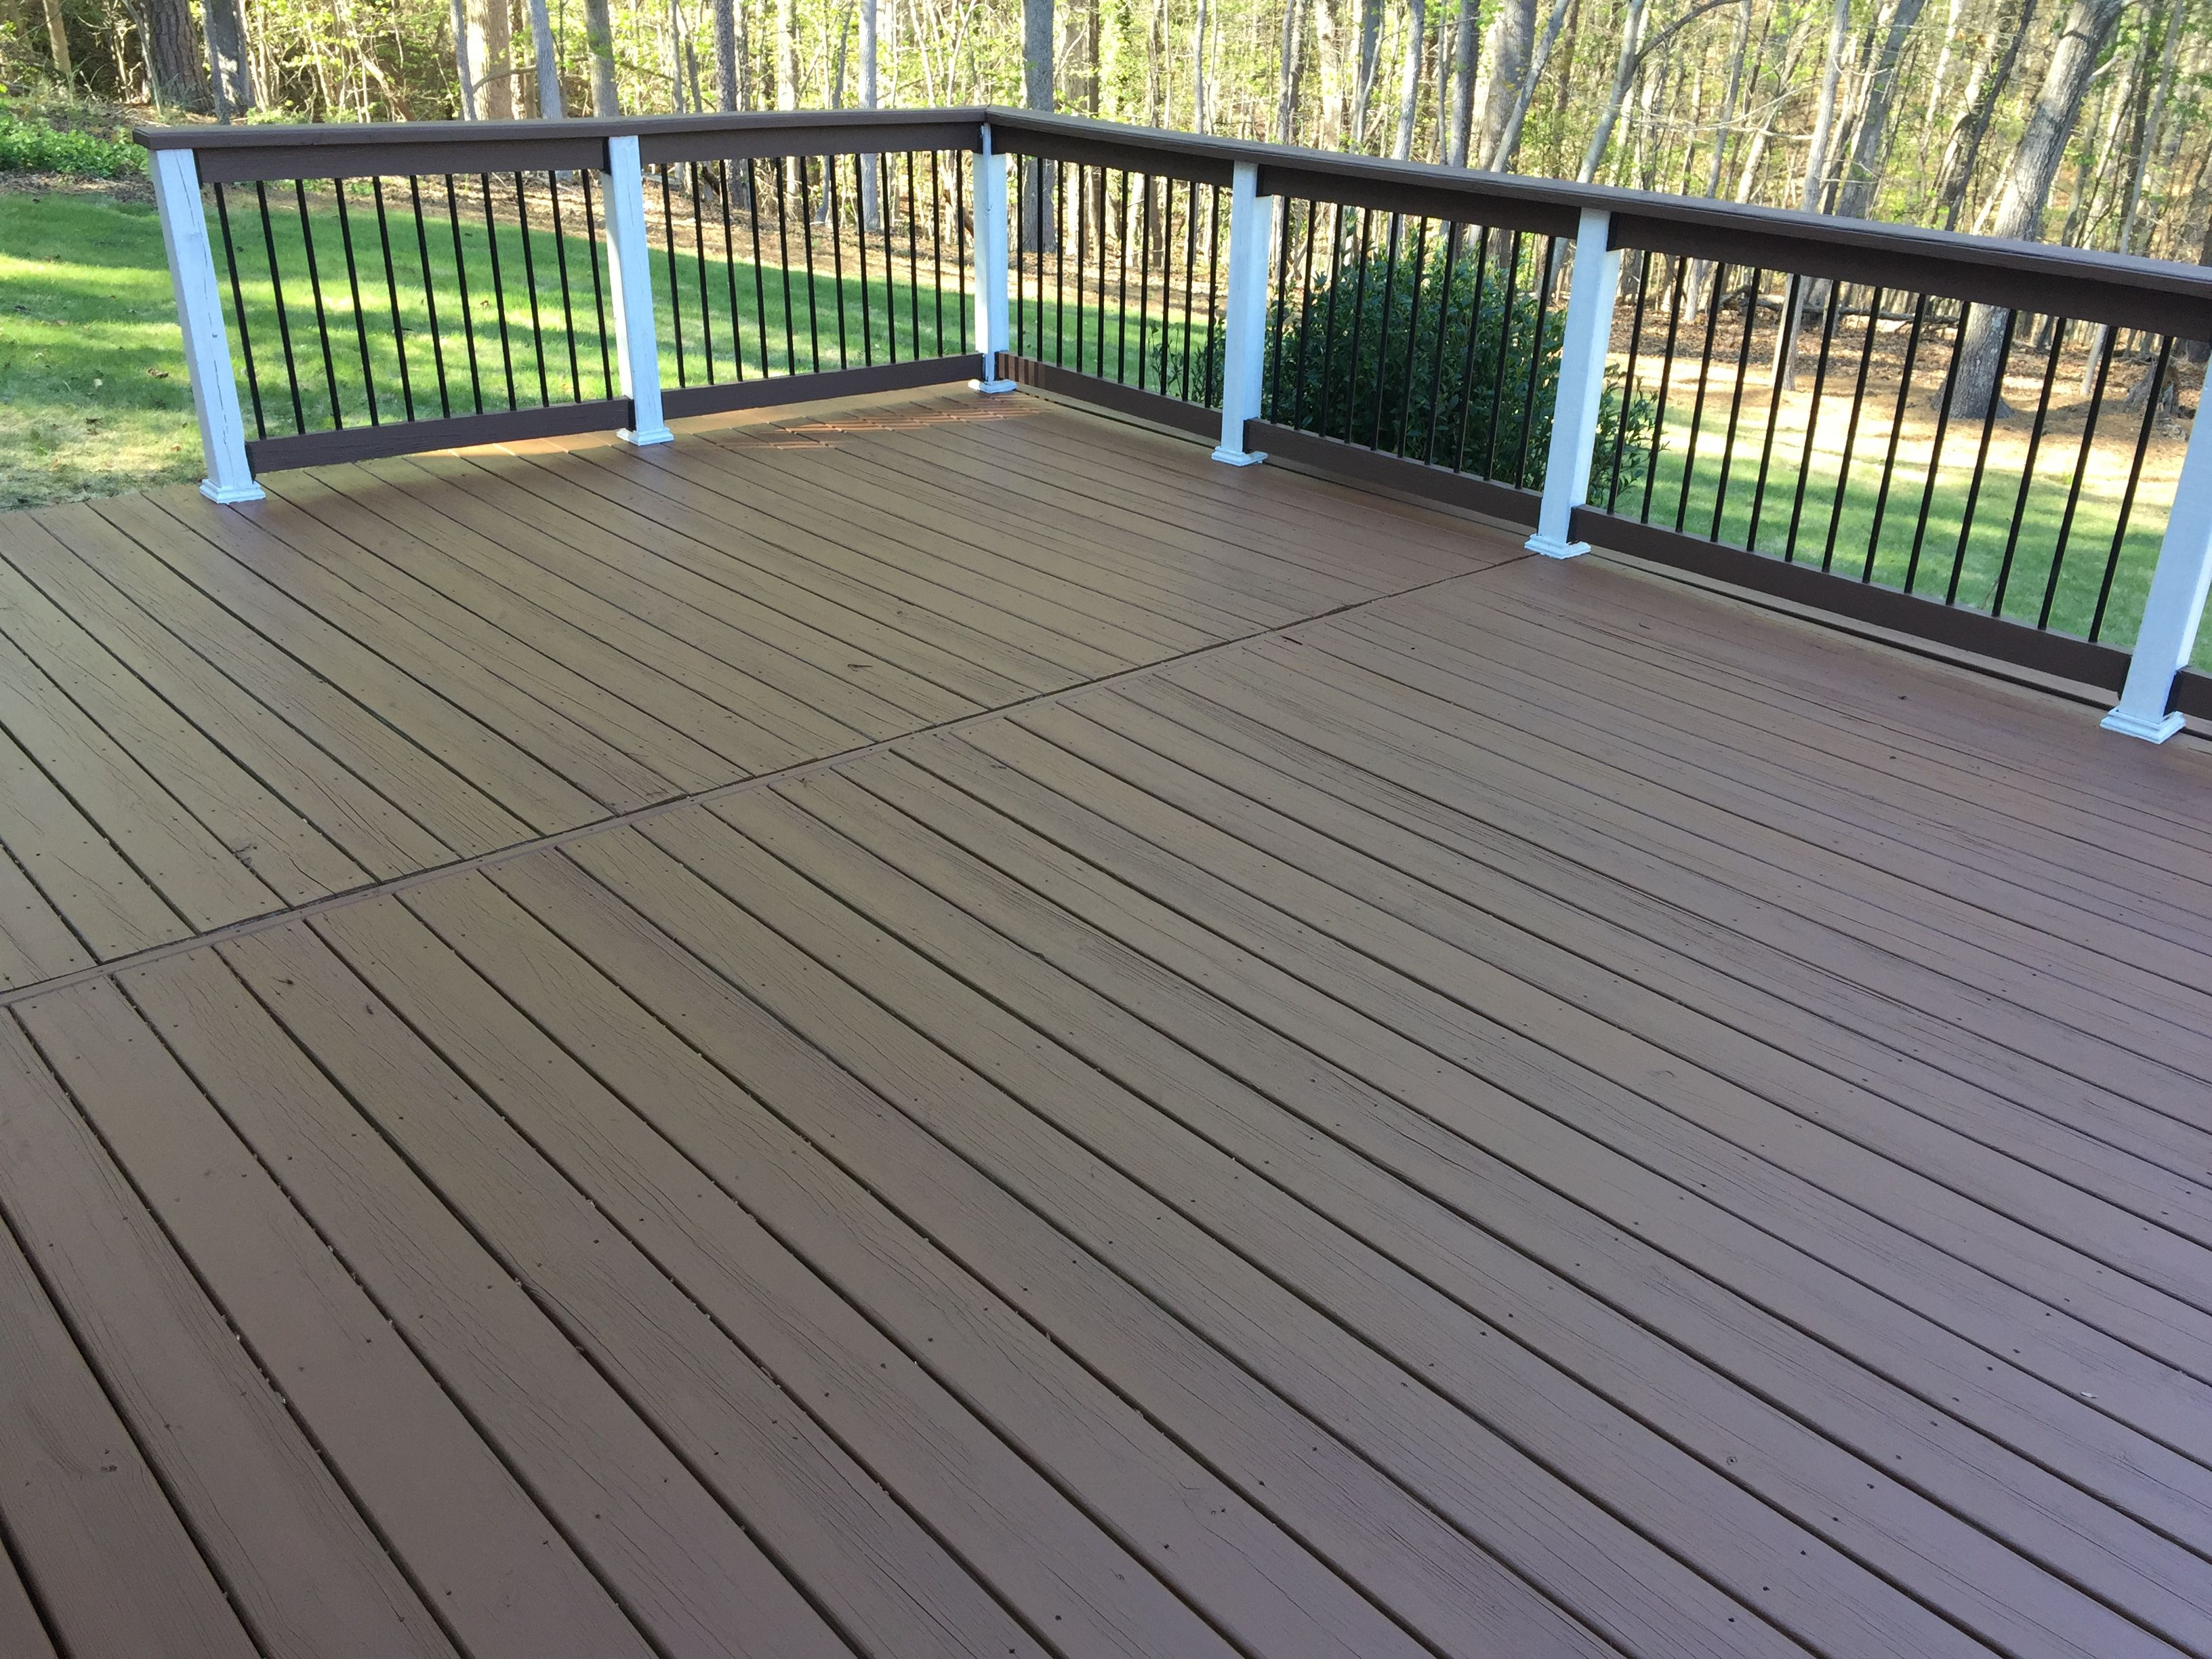 Decks Coating Your Old Wood And Concrete Surfaces With Deck Over throughout dimensions 3264 X 2448